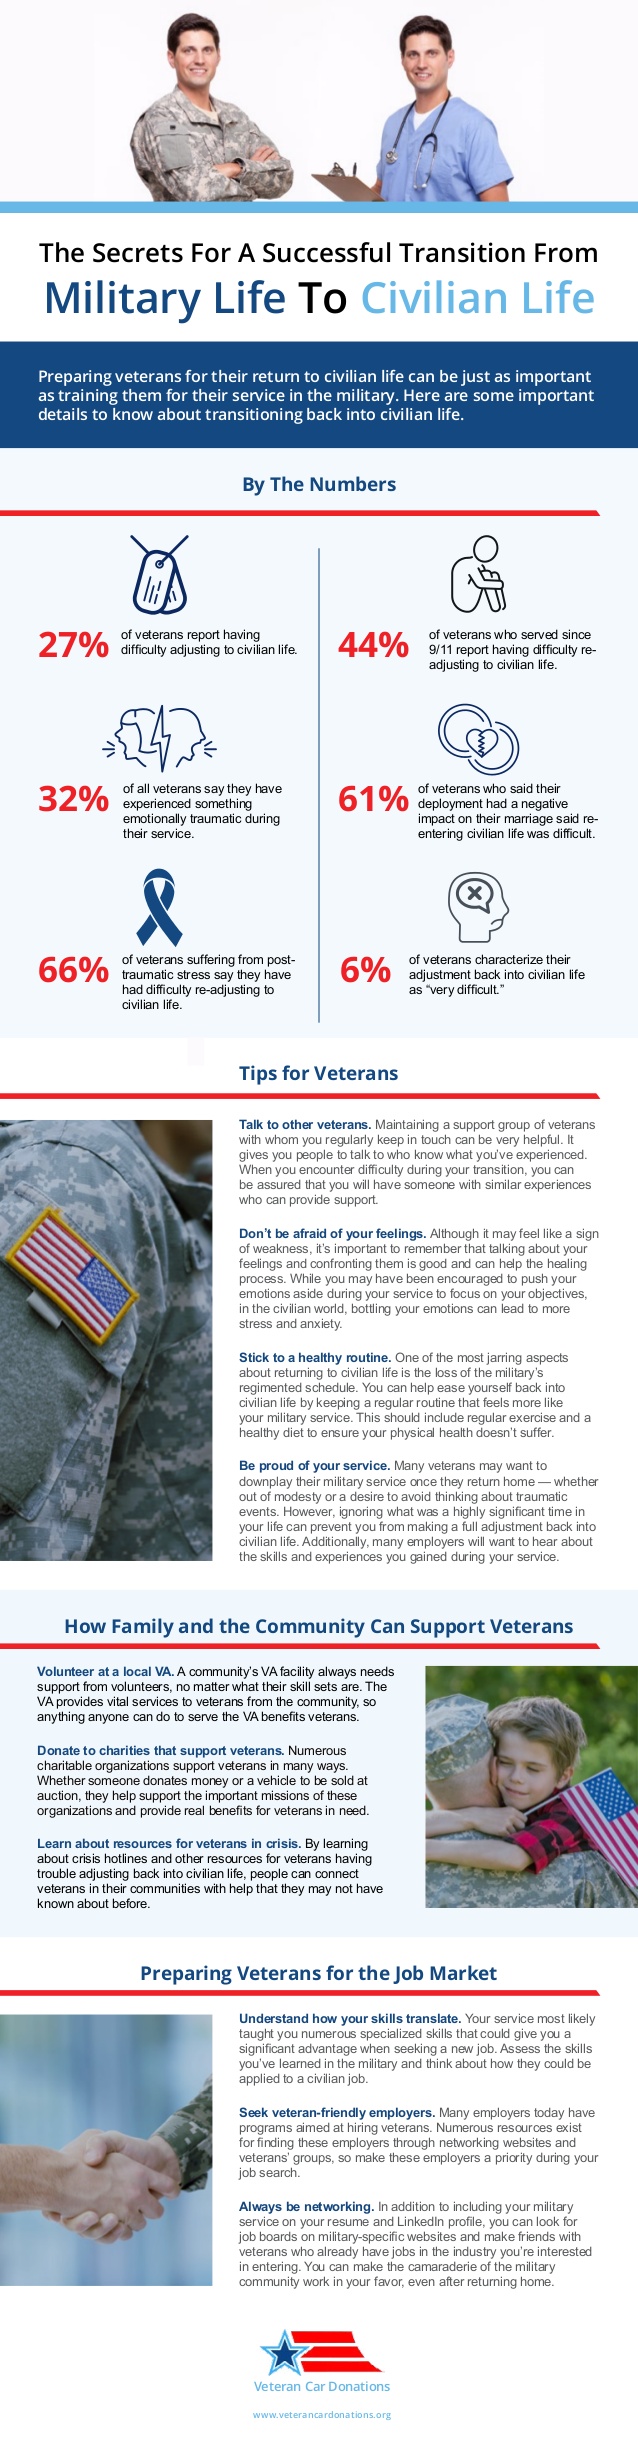 the-secrets-for-a-successful-transition-from-military-life-to-civilian-life-1-638